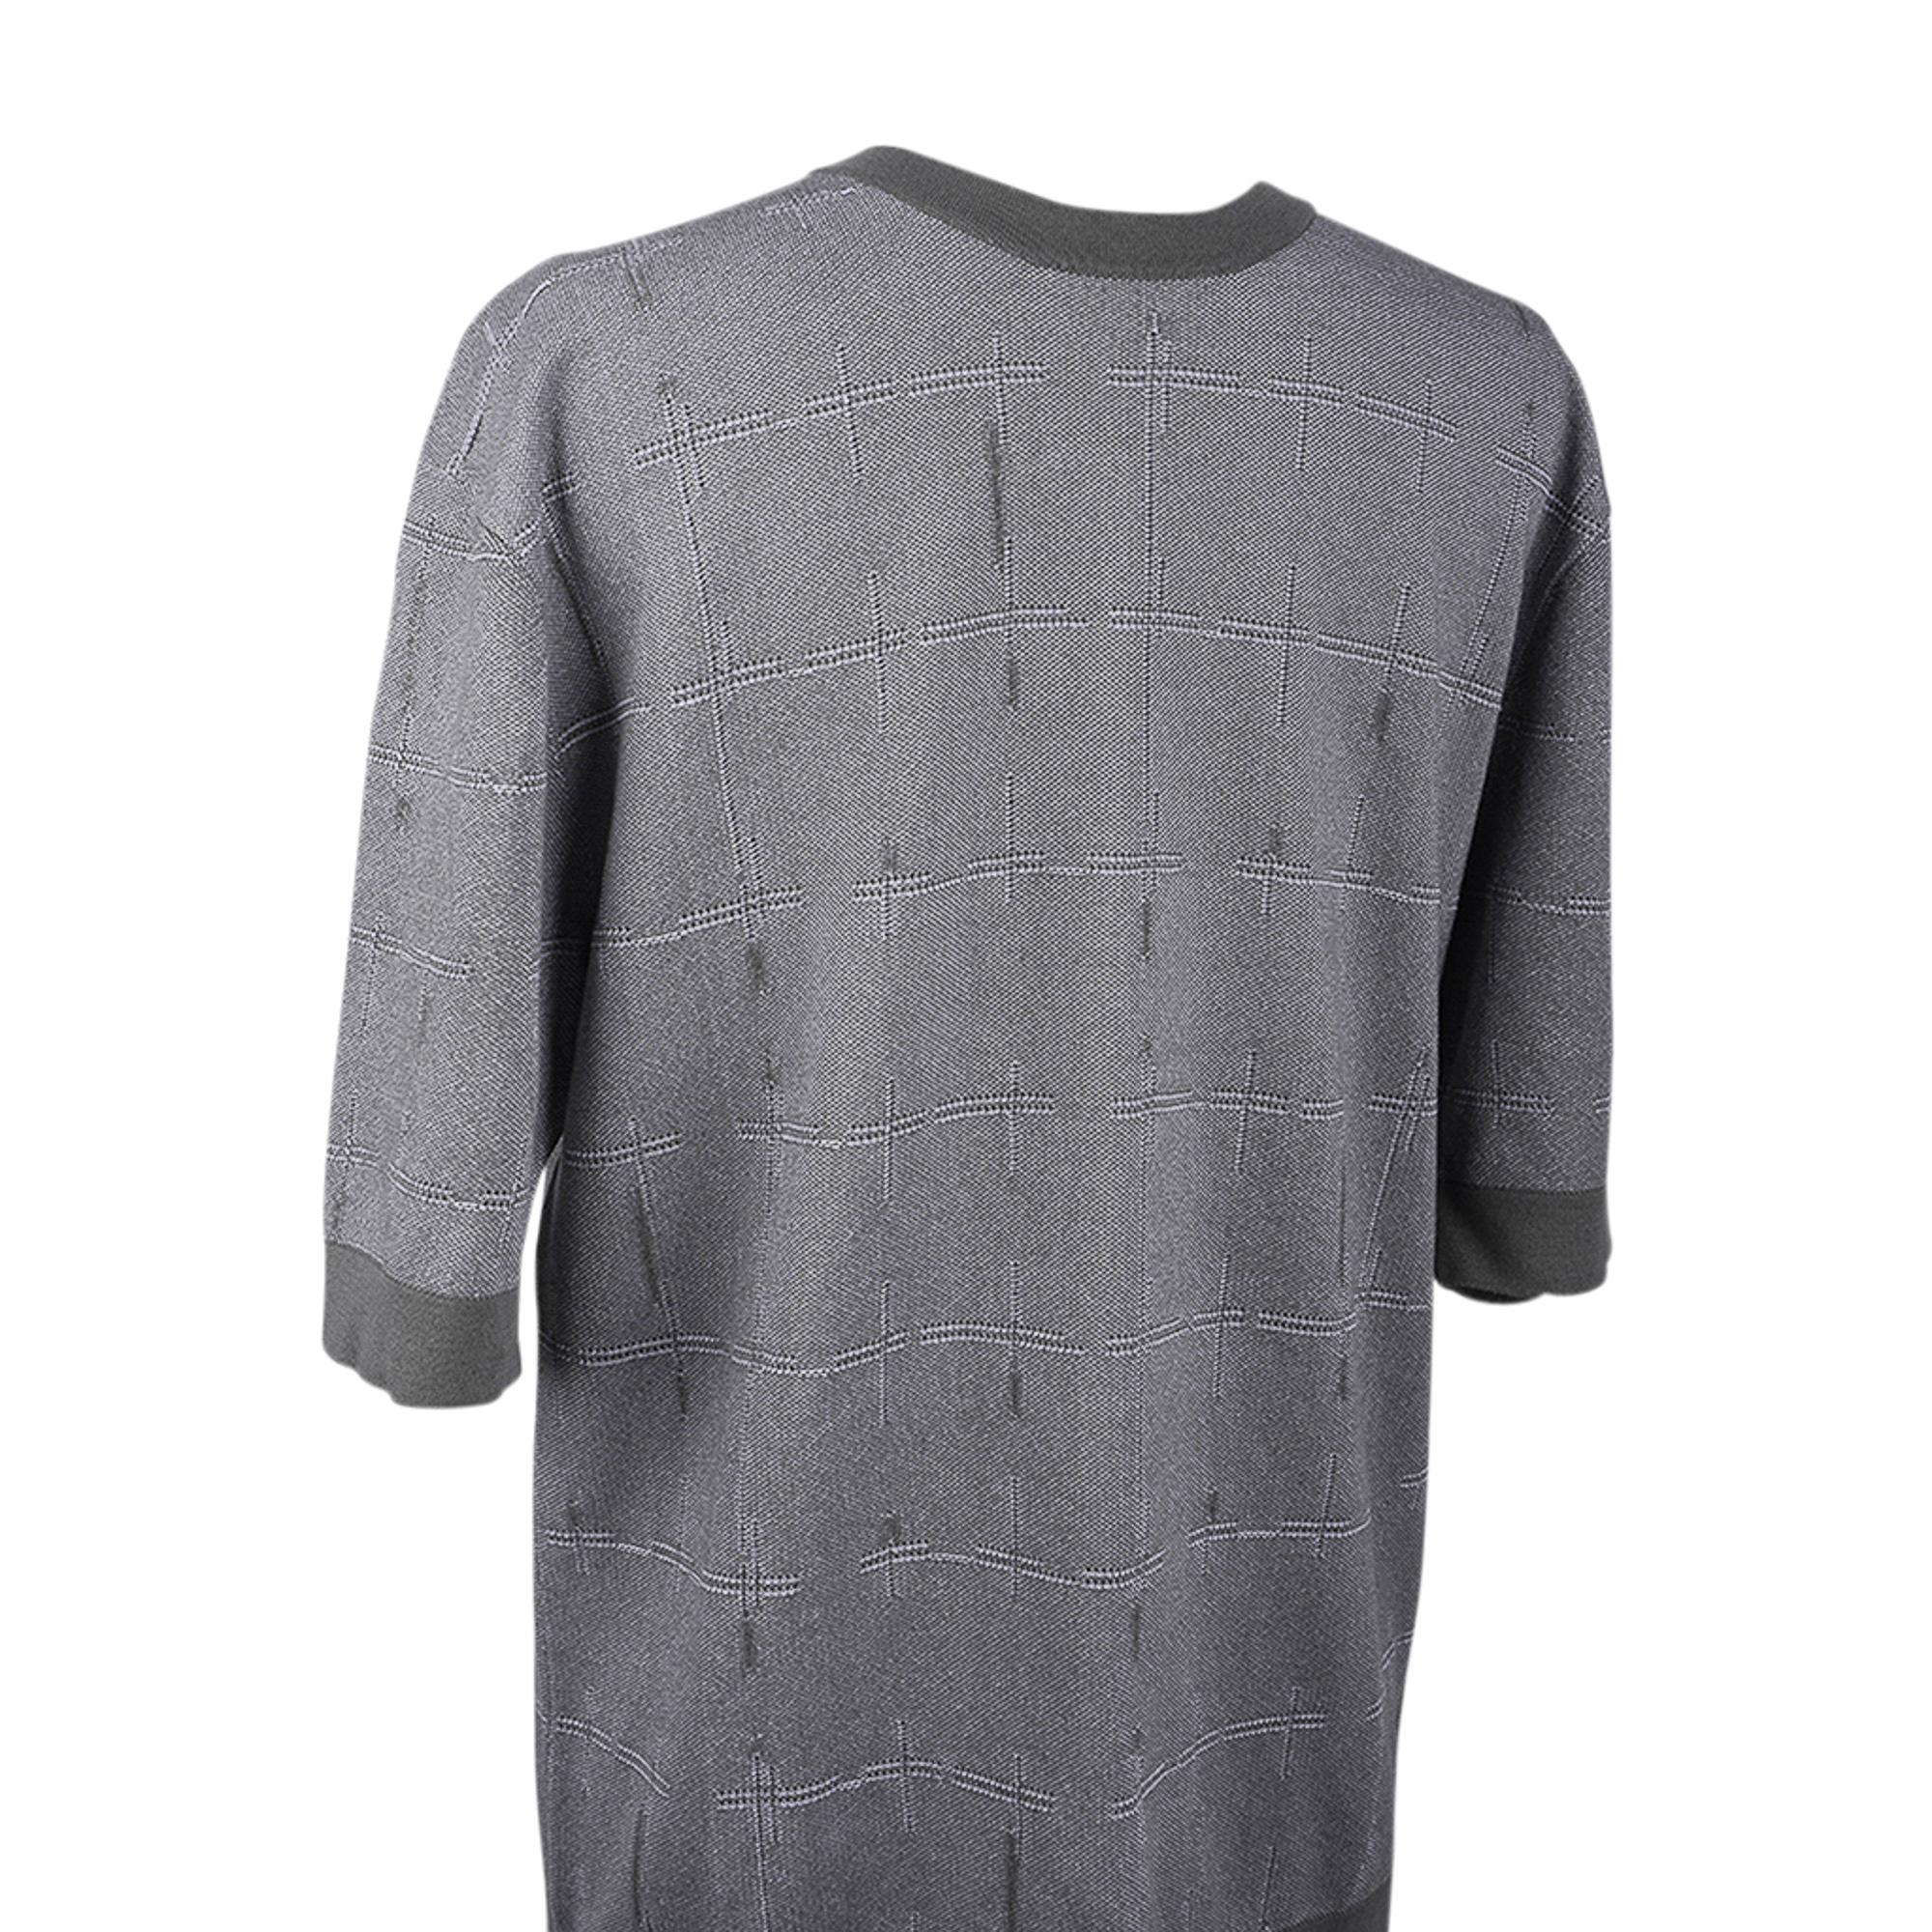 Mightychic offers an Hermes H en Carreaux Boxy Fit T-Shirt featured in Chanvre (Hemp).
Subtle stich detail creates a tone on tone H motif.
Ribbing around crewneck and sleeves.
Short sleeve shirt runs true to size.
Classic style and effortless